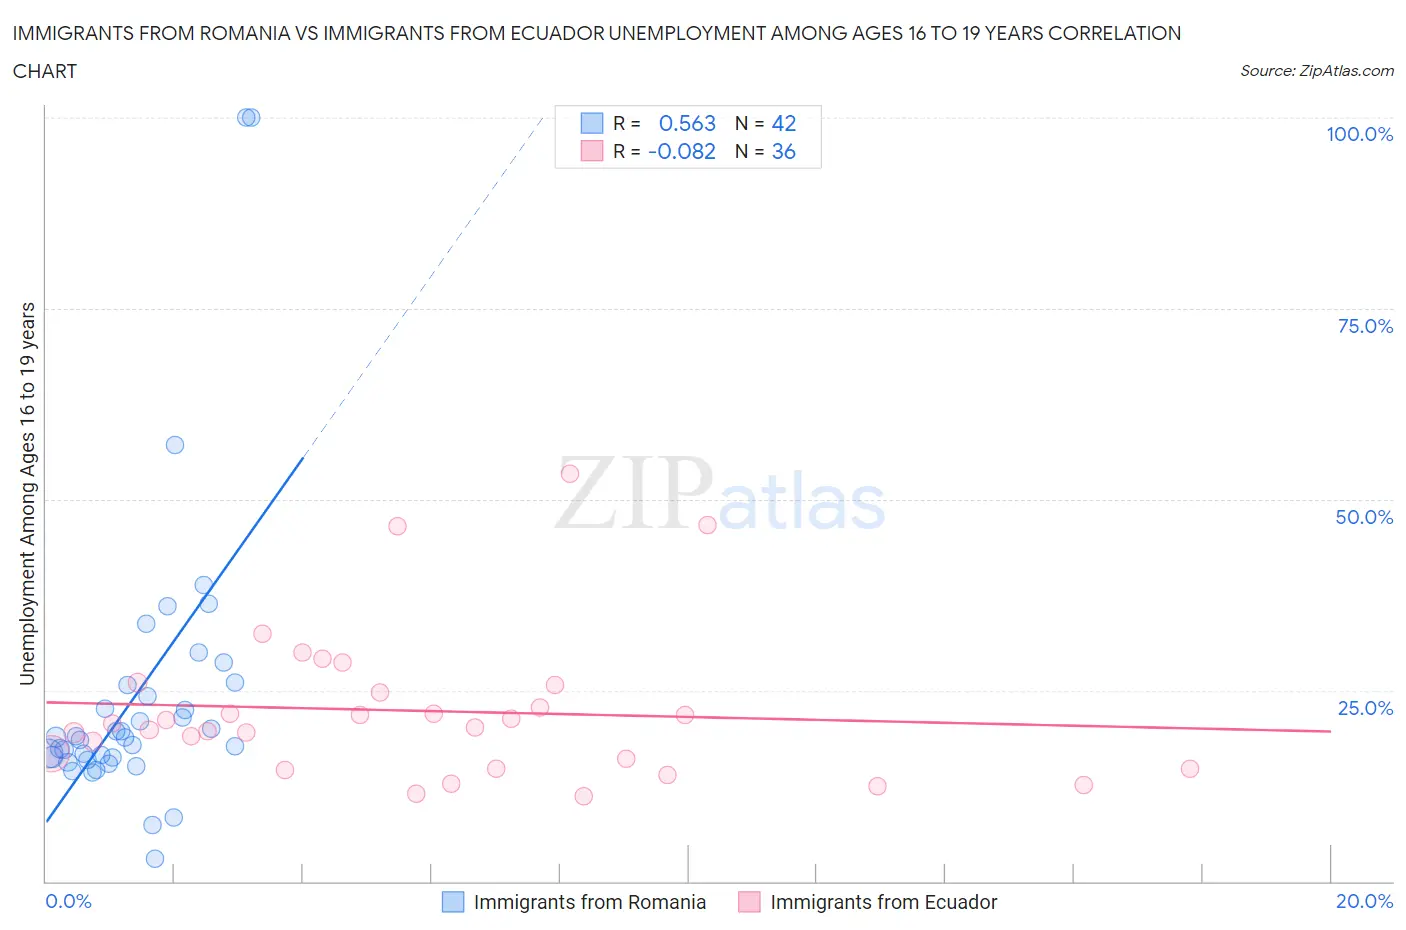 Immigrants from Romania vs Immigrants from Ecuador Unemployment Among Ages 16 to 19 years